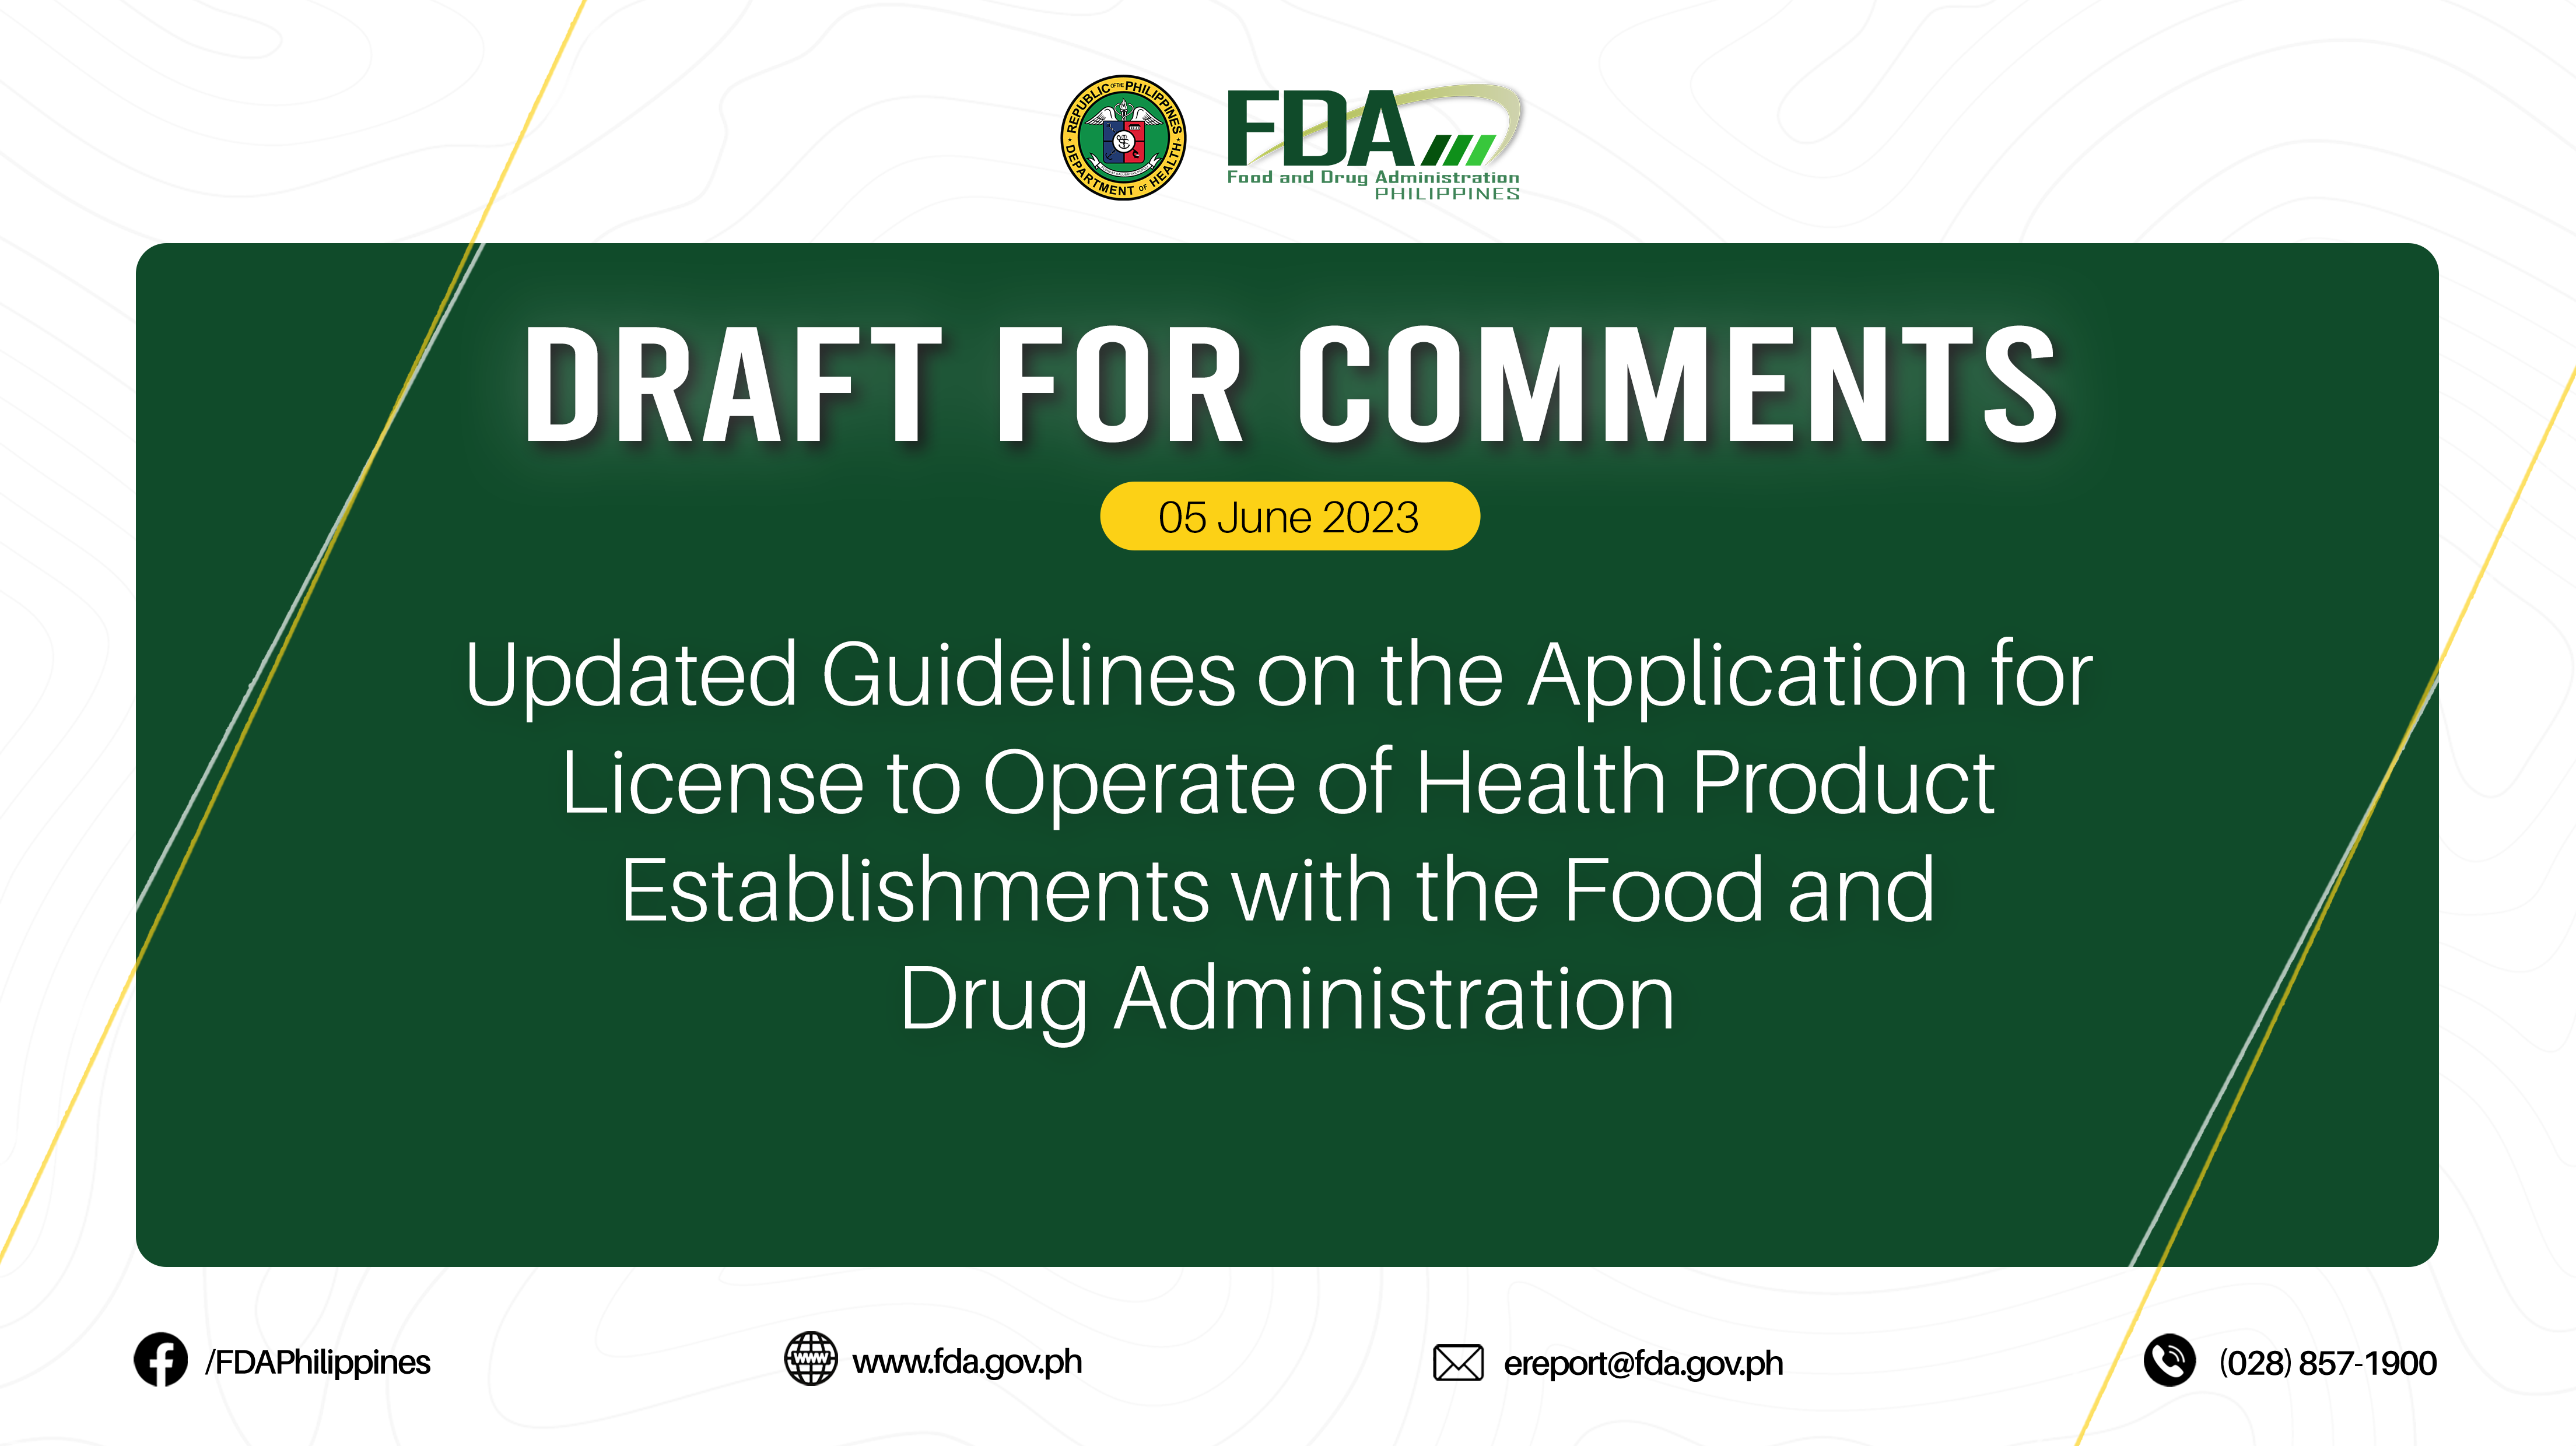 Draft for Comments ||  Updated Guidelines on the Application for License to Operate of Health Product Establishments with the Food and Drug Administration